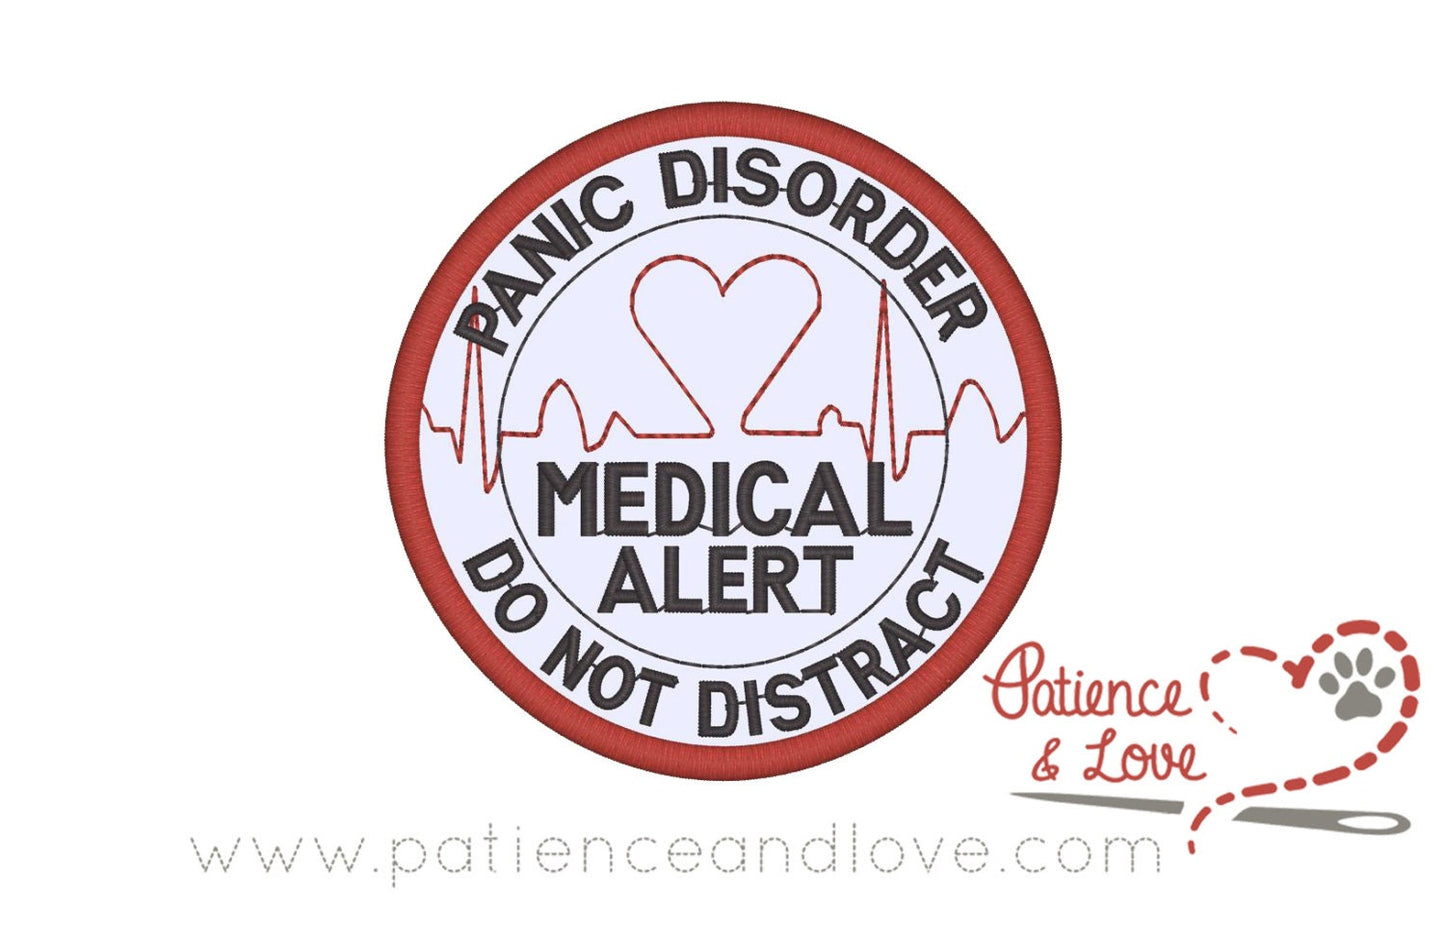 Panic Disorder - Medical Alert - Do Not Distract, Heart EKG, 3-inch round patch